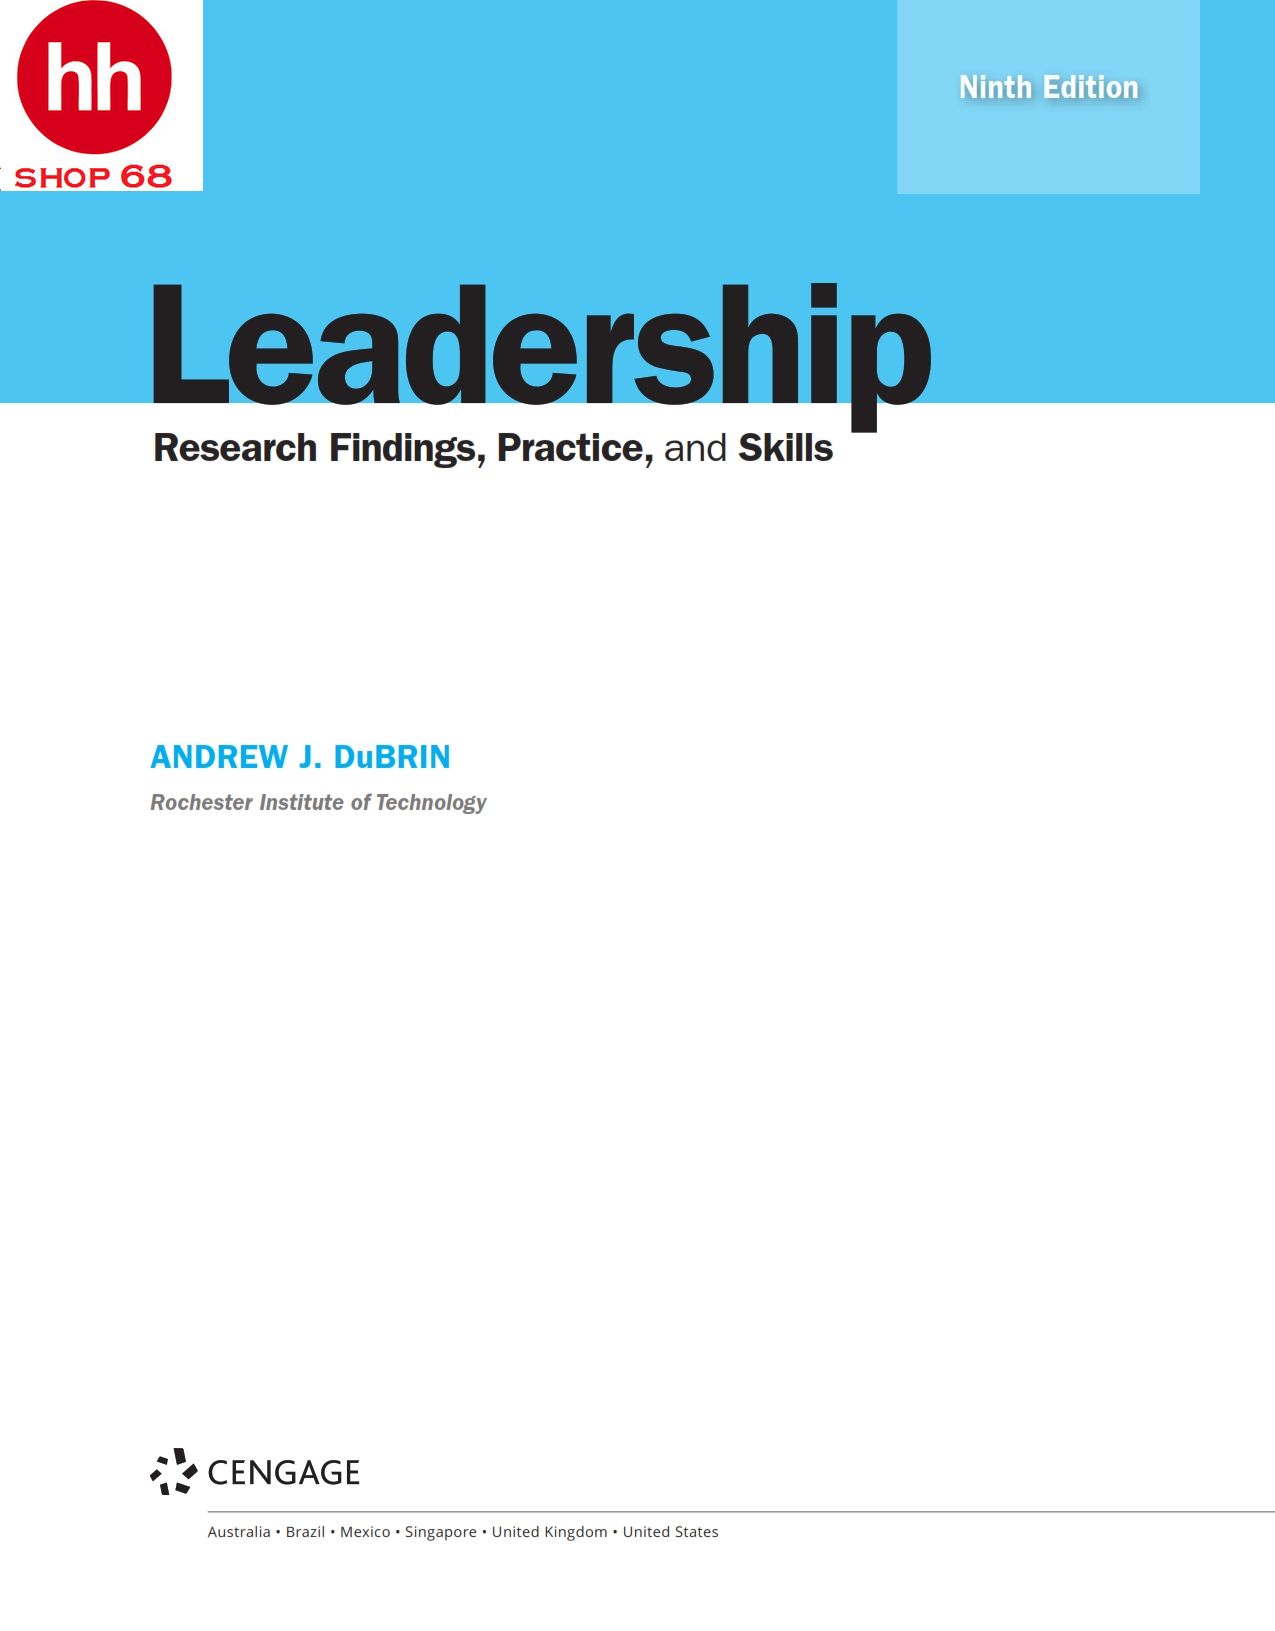 leadership research findings practice and skills 9th edition pdf